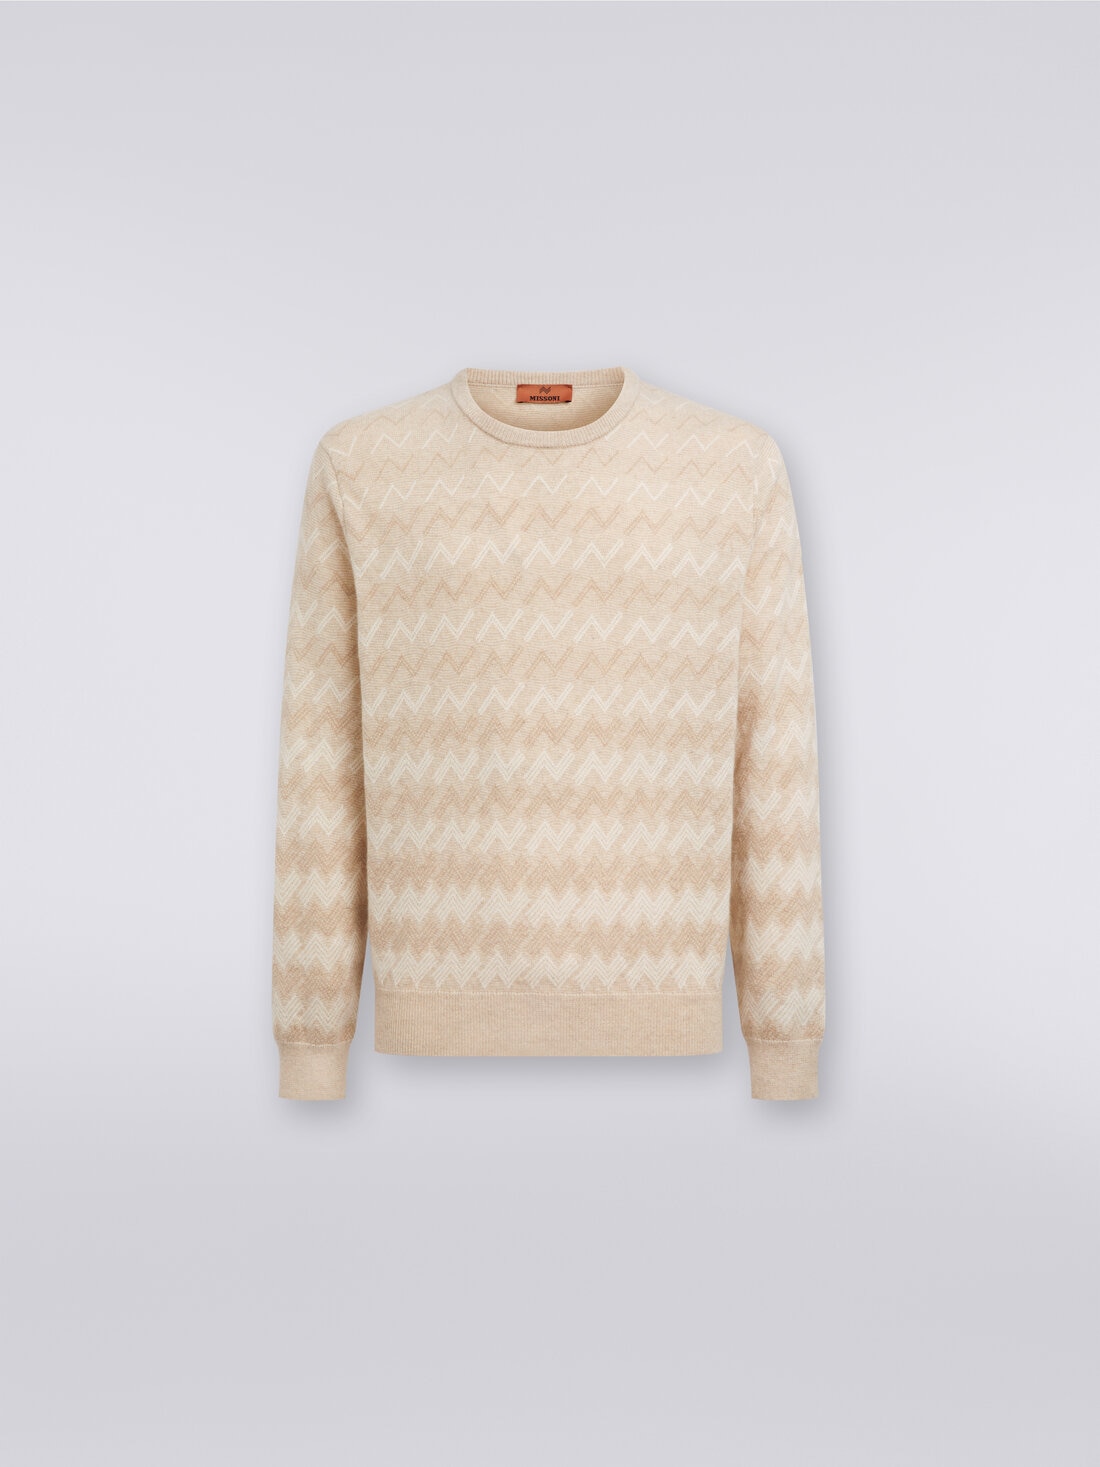 Cashmere crew-neck sweater with zigzags, White & Beige - US23WN0VBK033KS01AB - 0